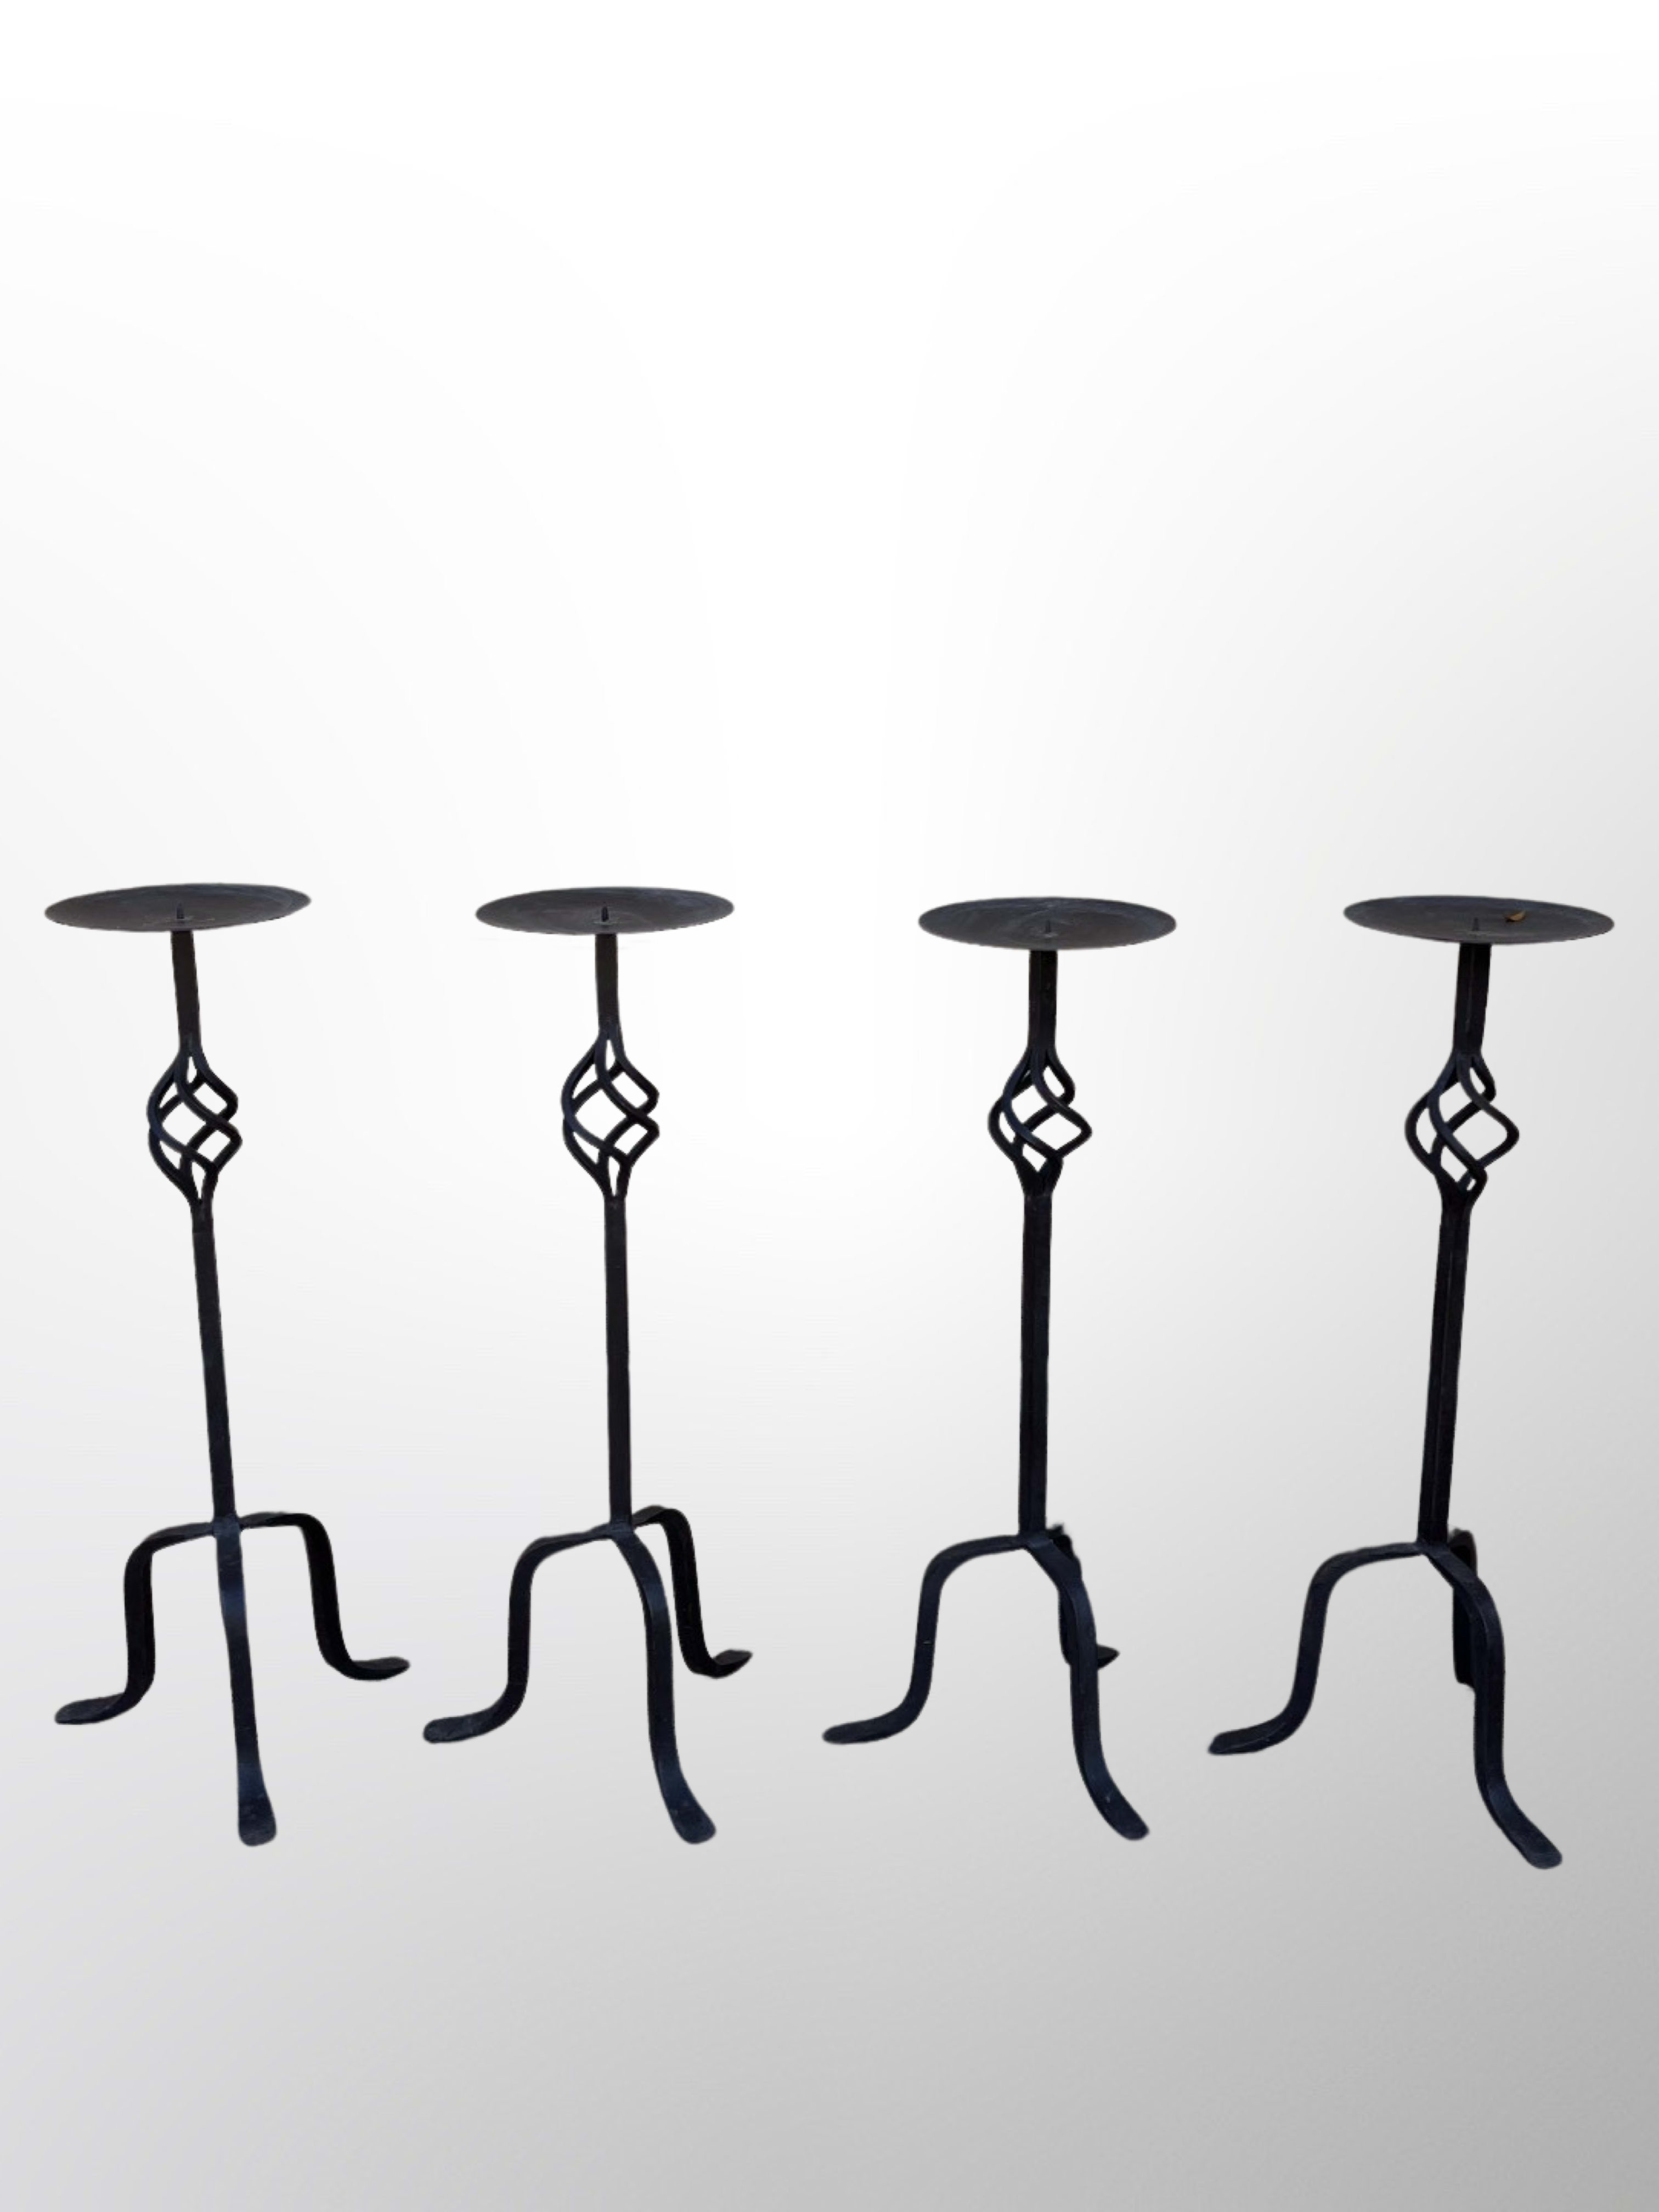 Tall Candle Stands - 4 Iron Tall Candle Stands